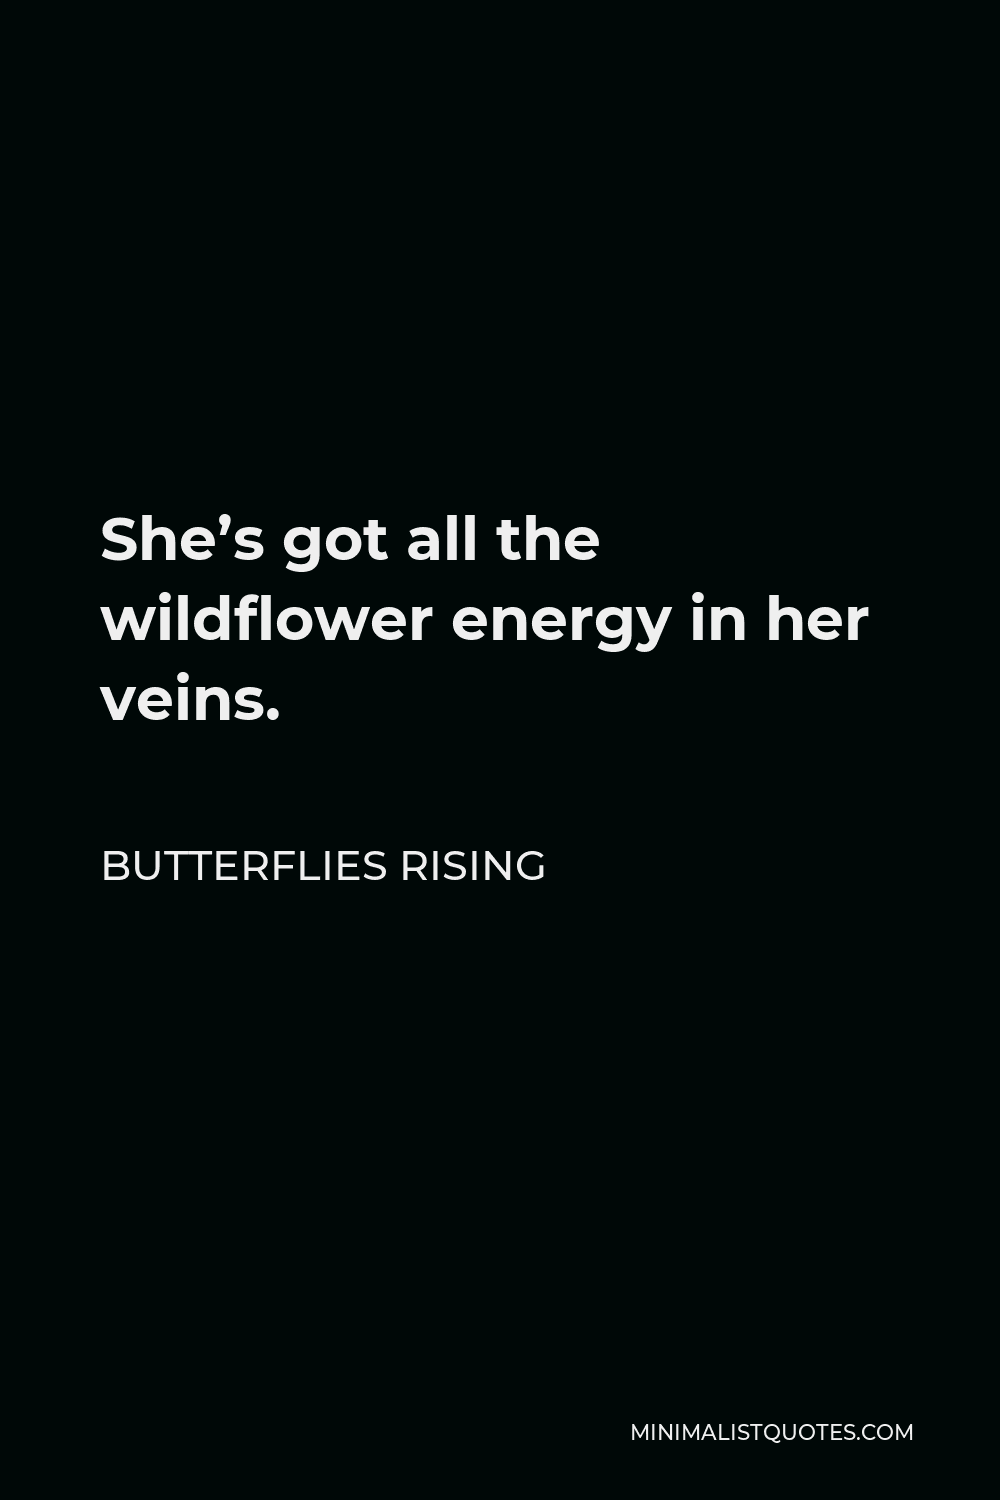 Butterflies Rising Quote - She’s got all the wildflower energy in her veins.